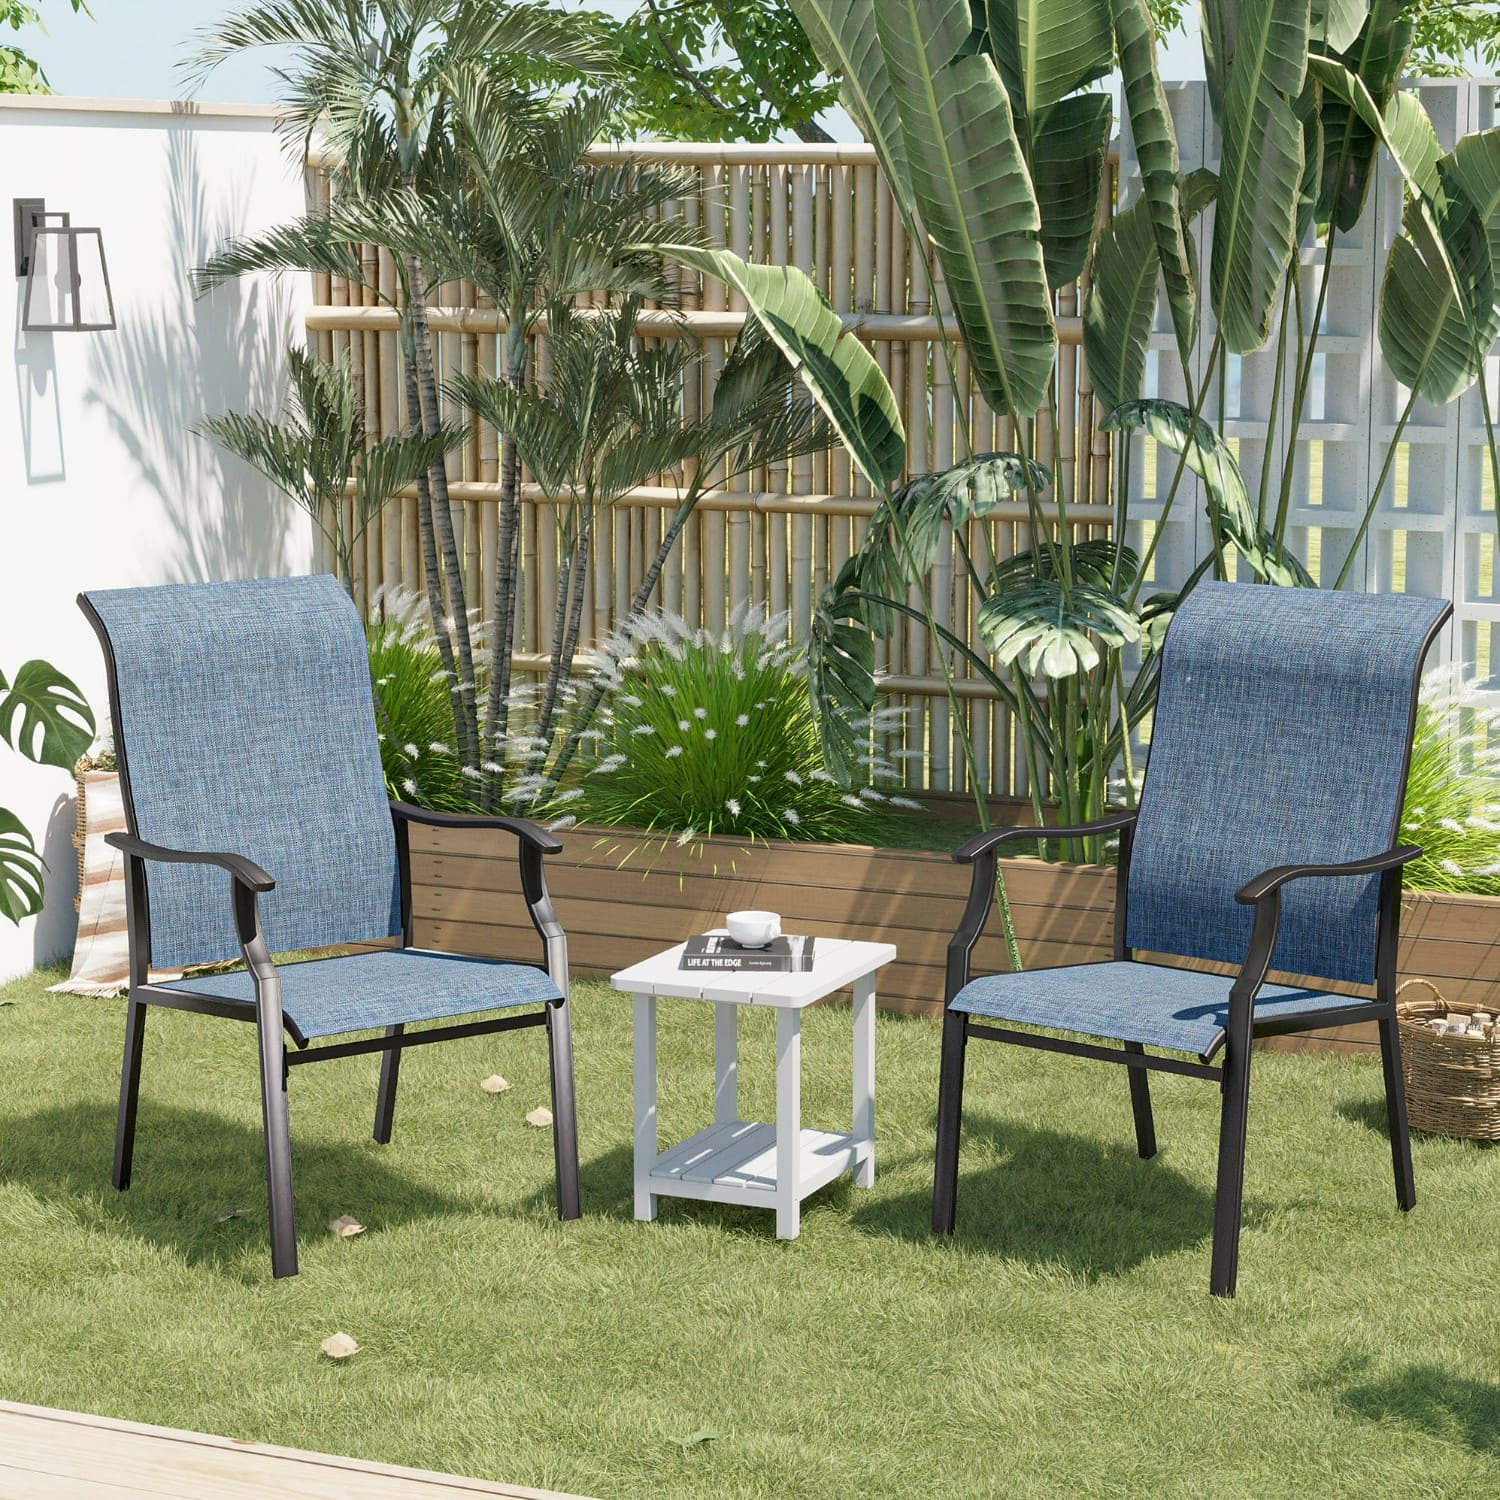 Vicllax 3-Piece Patio Chairs Set, Sling Dining Chairs and White Rectangular Side Table